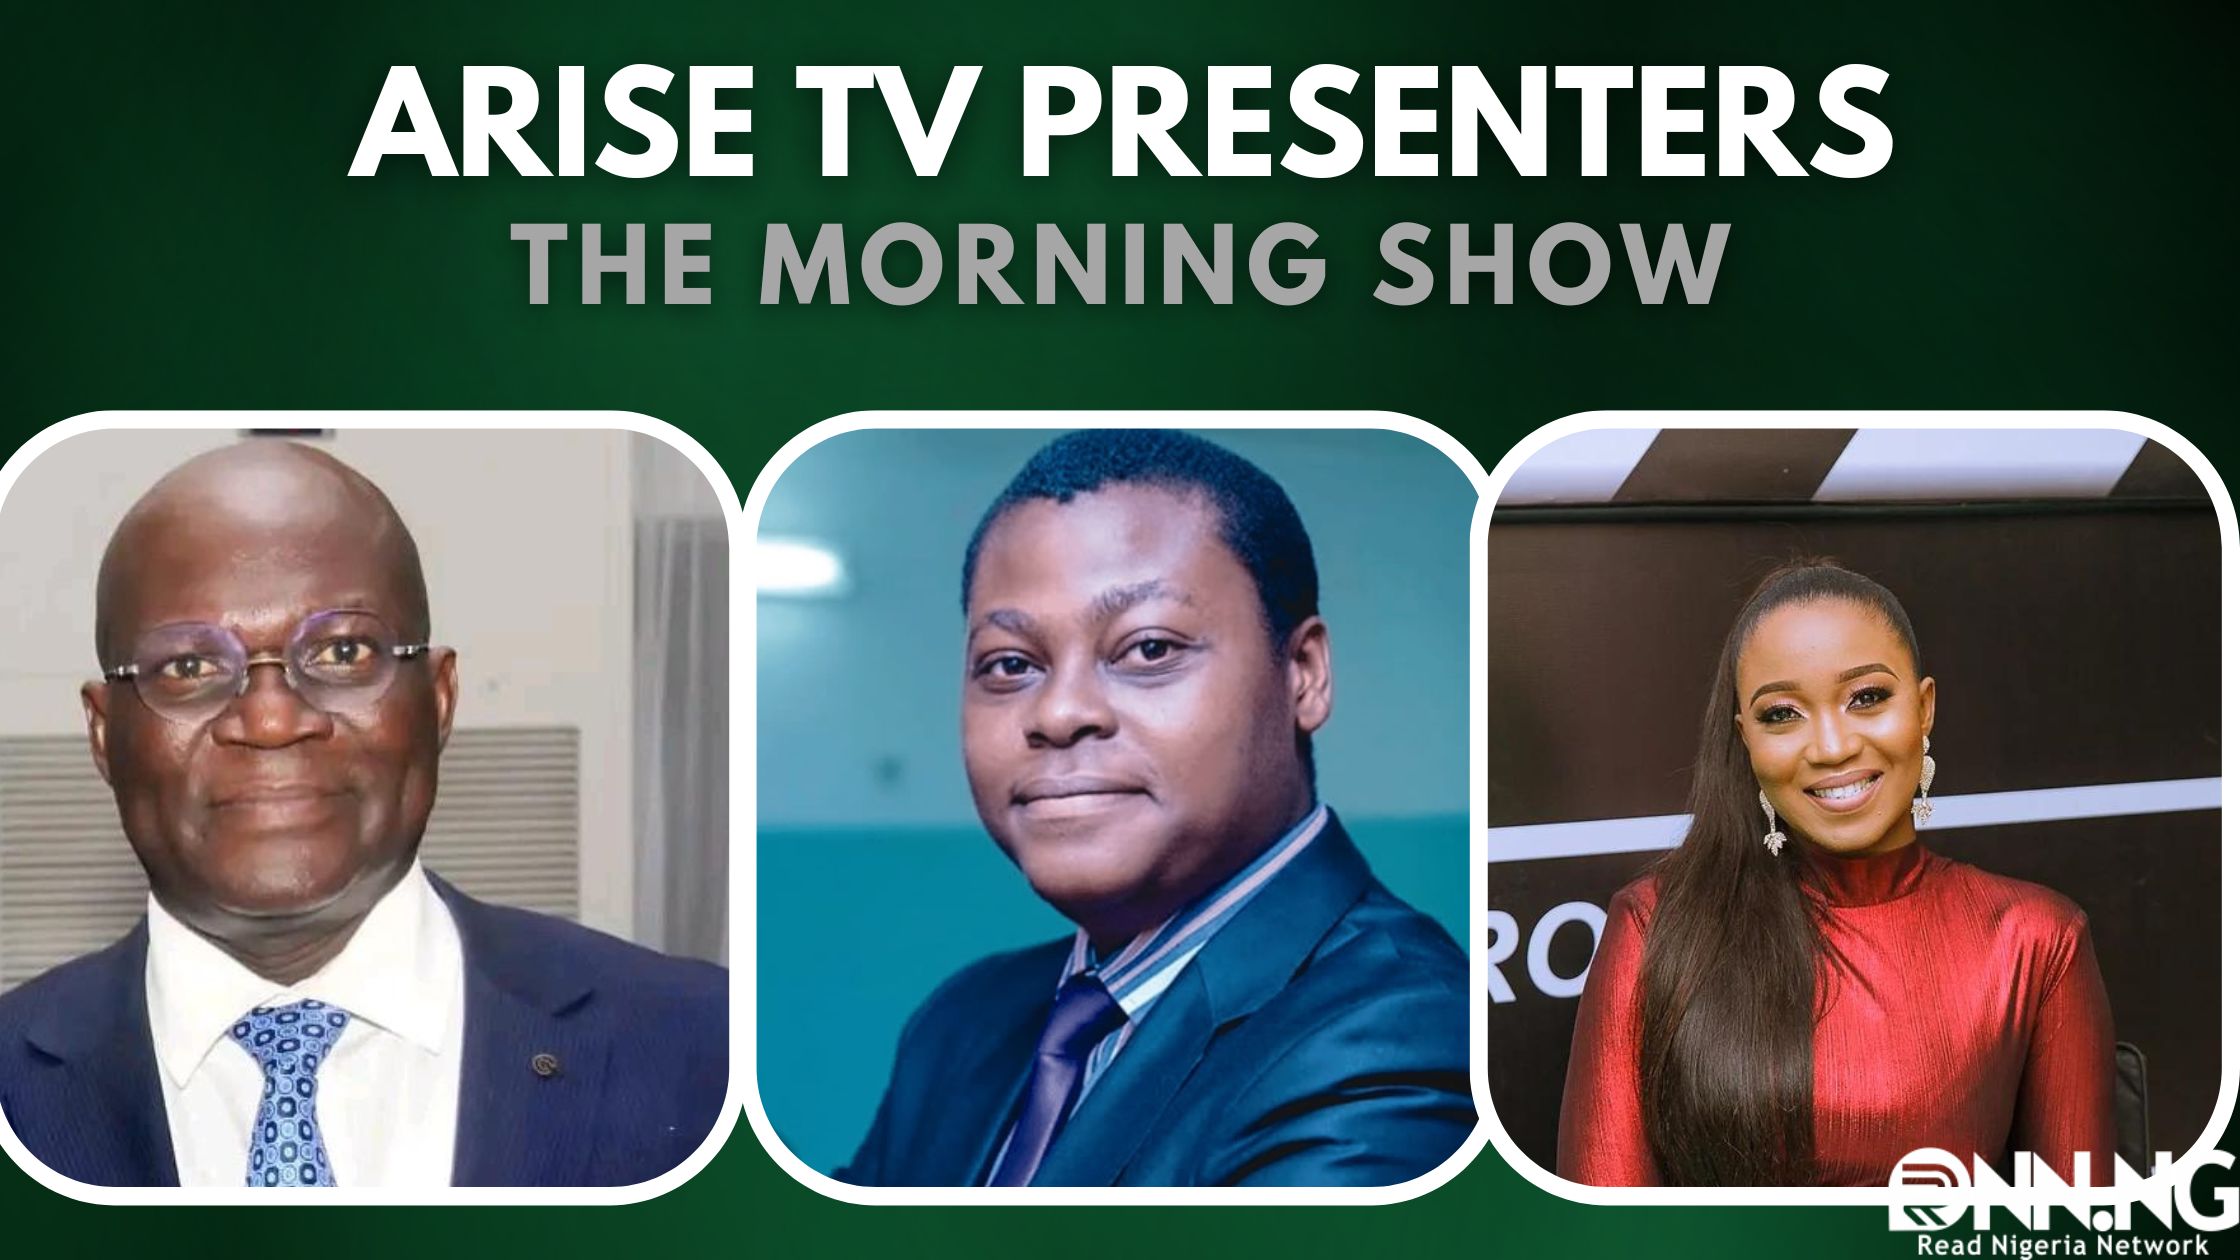 Meet The Arise Tv Presenters of The Morning Show